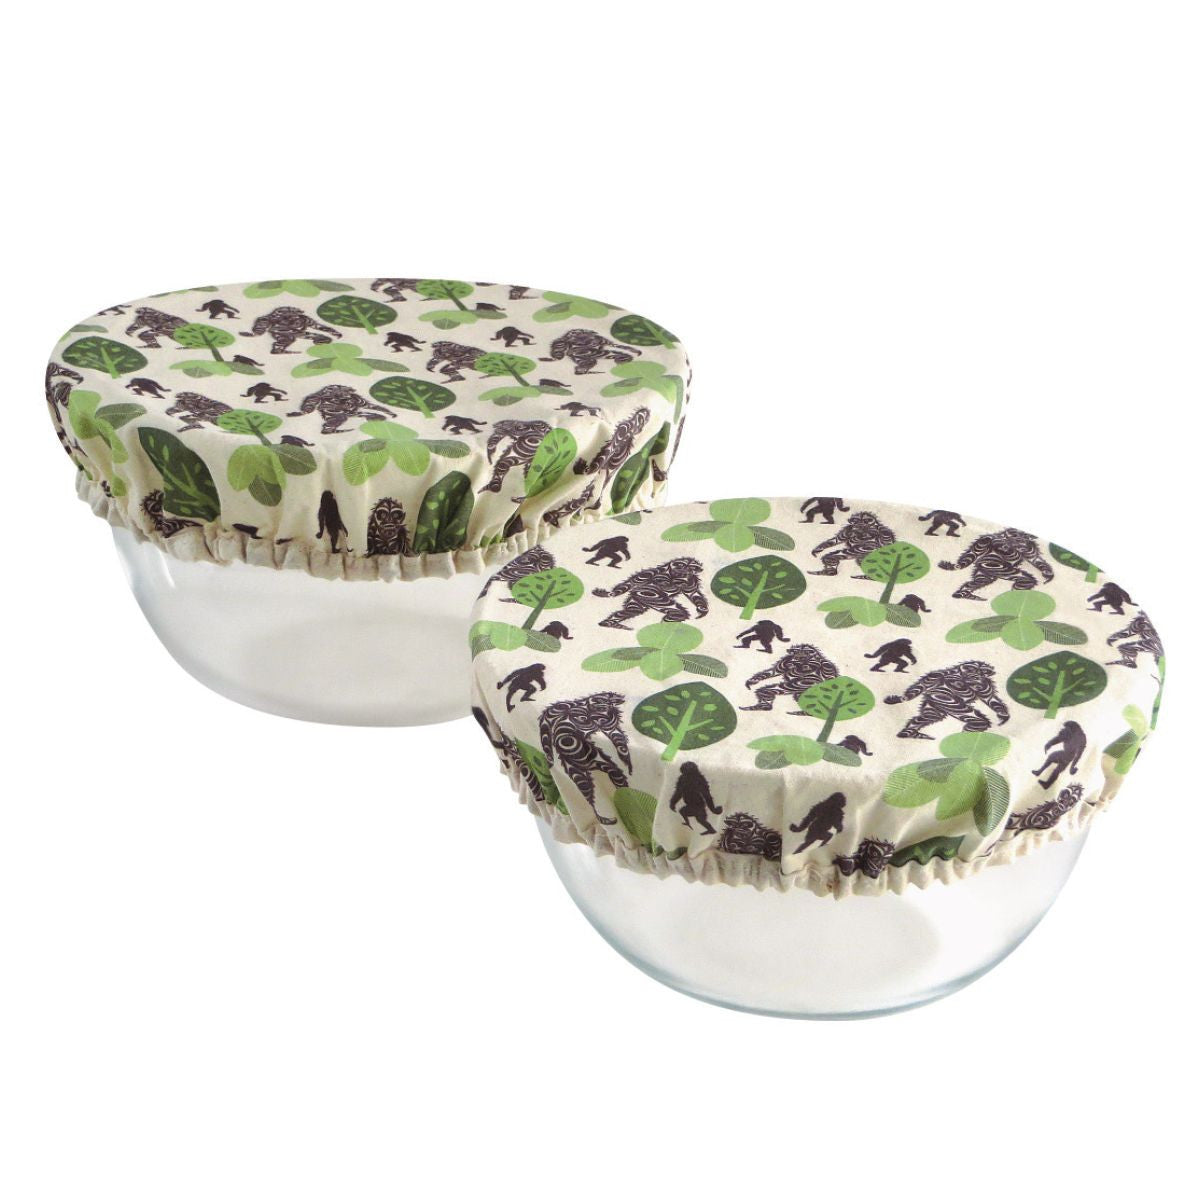 Reusable Bowl Covers - Sasquatch by Francis Horne, Sr. (Set of 2)